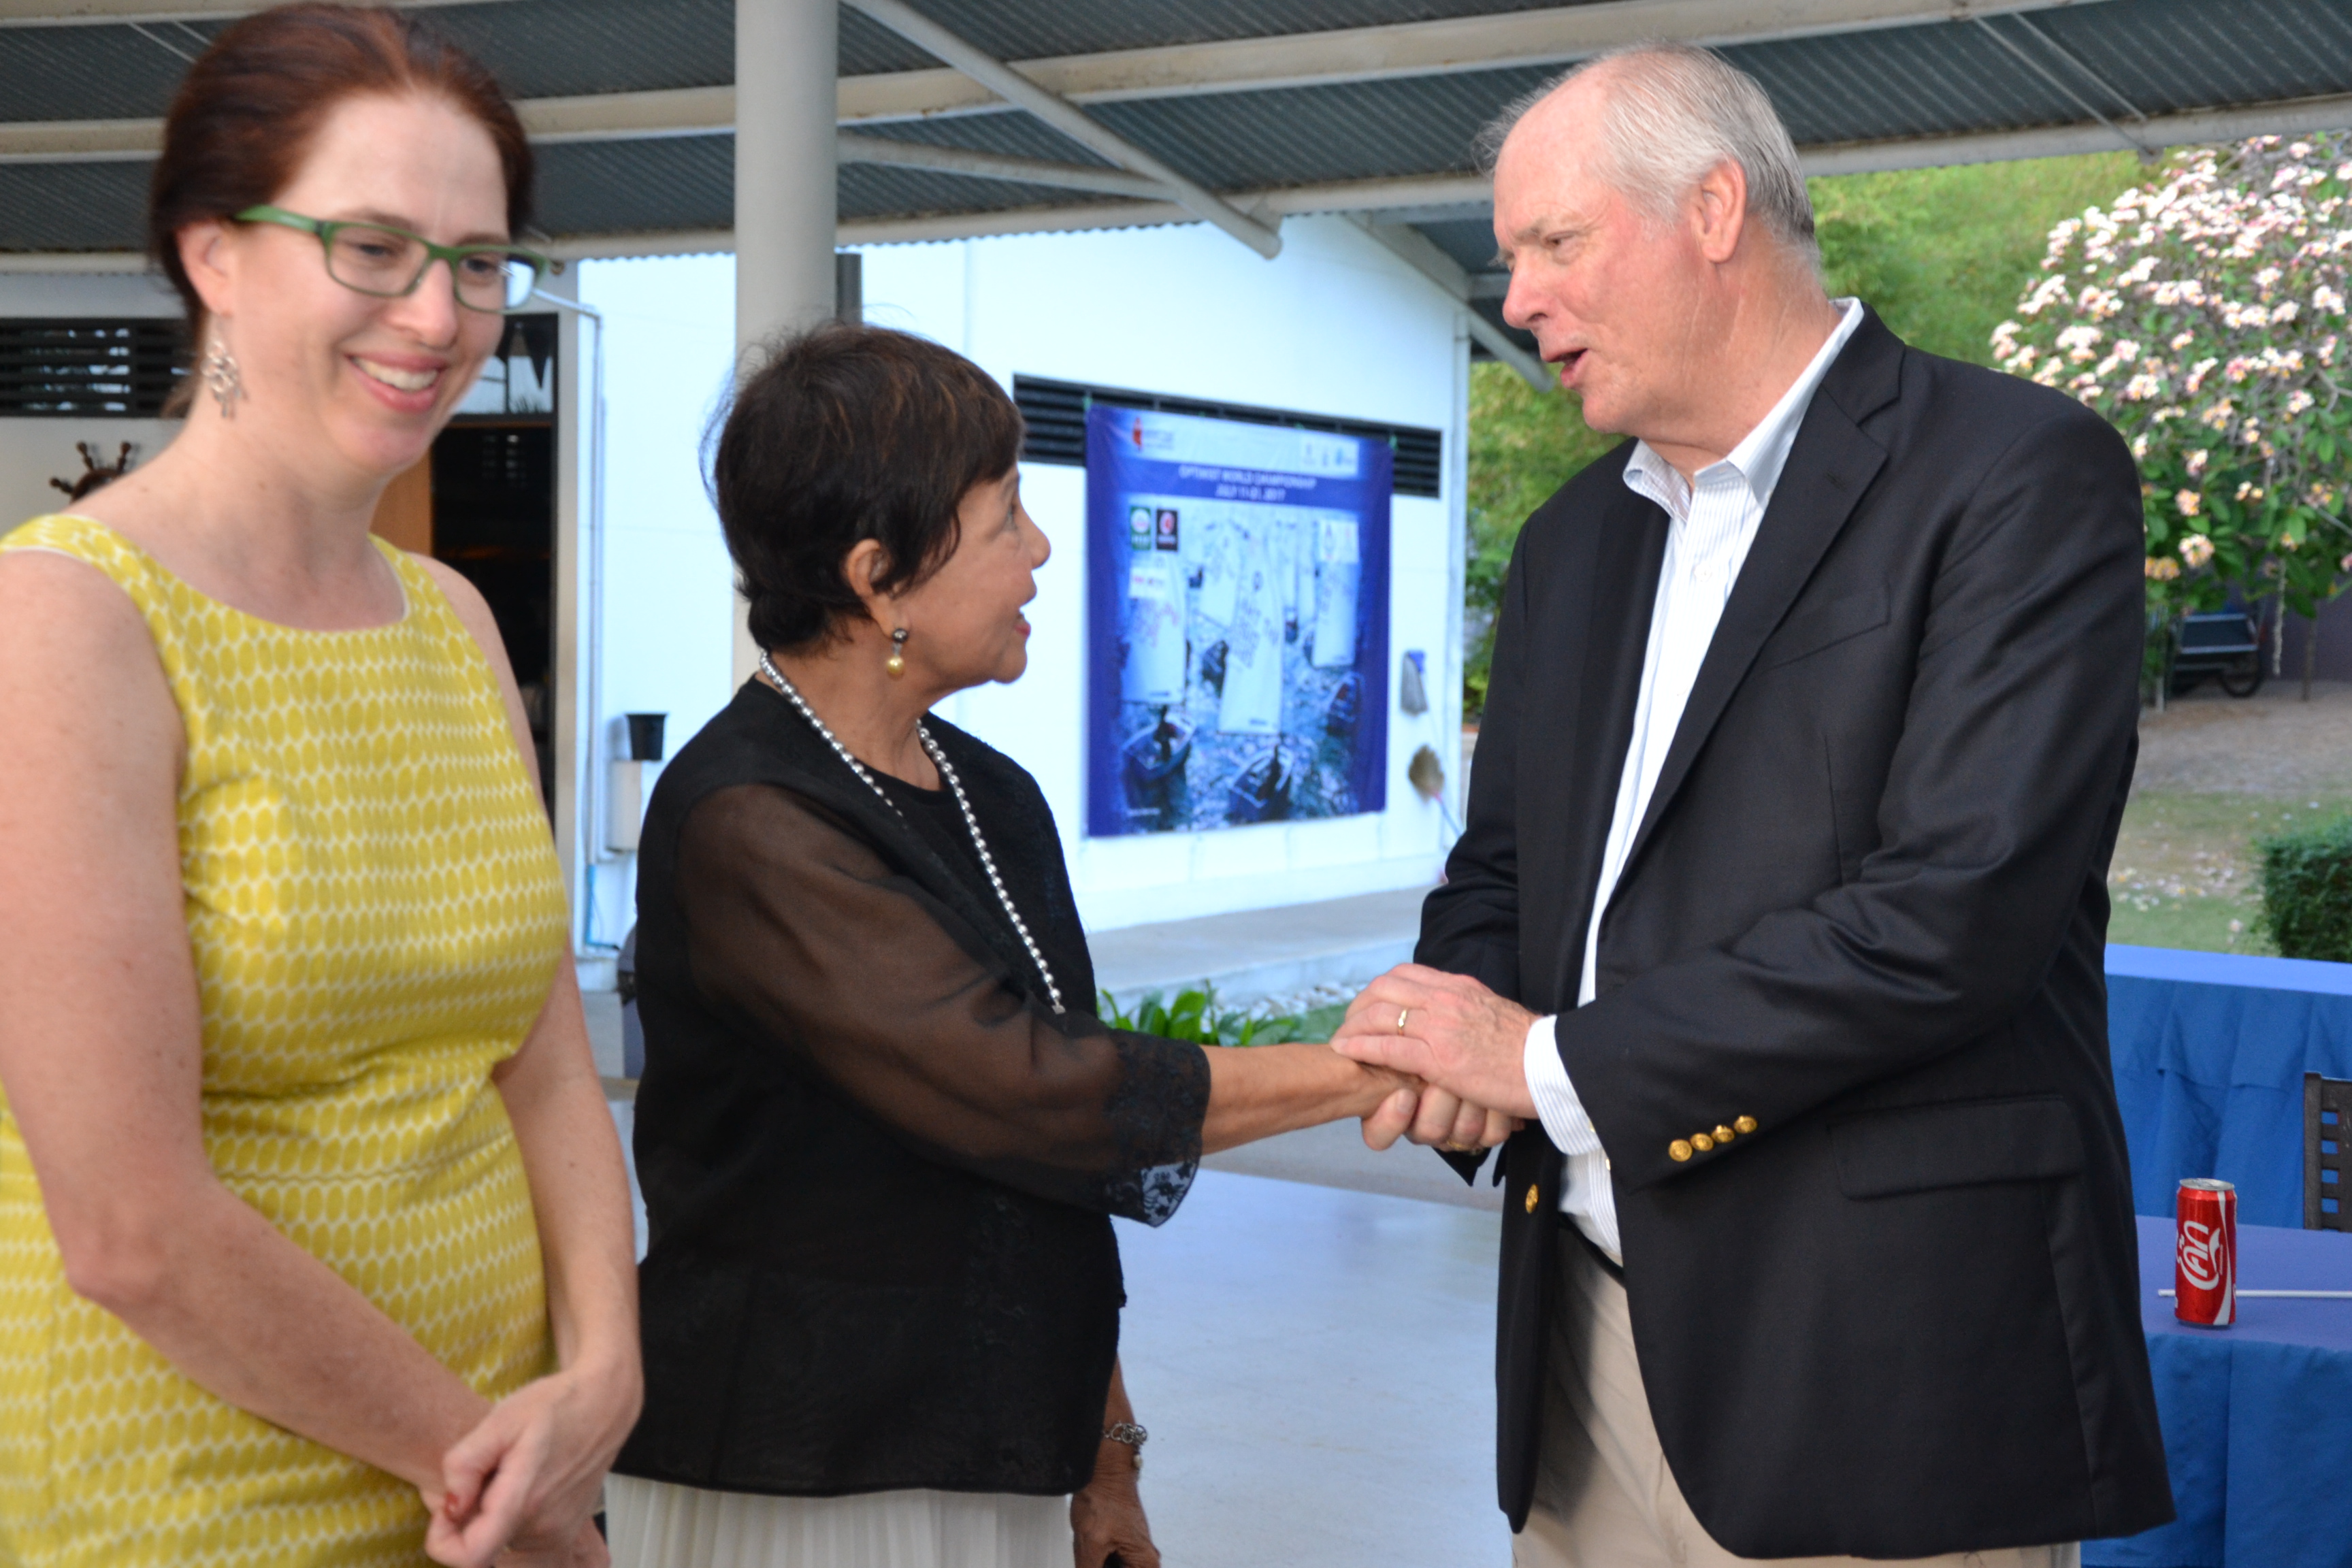 Anne Lee Seshadri, Cultural & Educational Officer of the US Embassy Bangkok seems delighted as Gary Jobson greets Sopin Thappajug. 